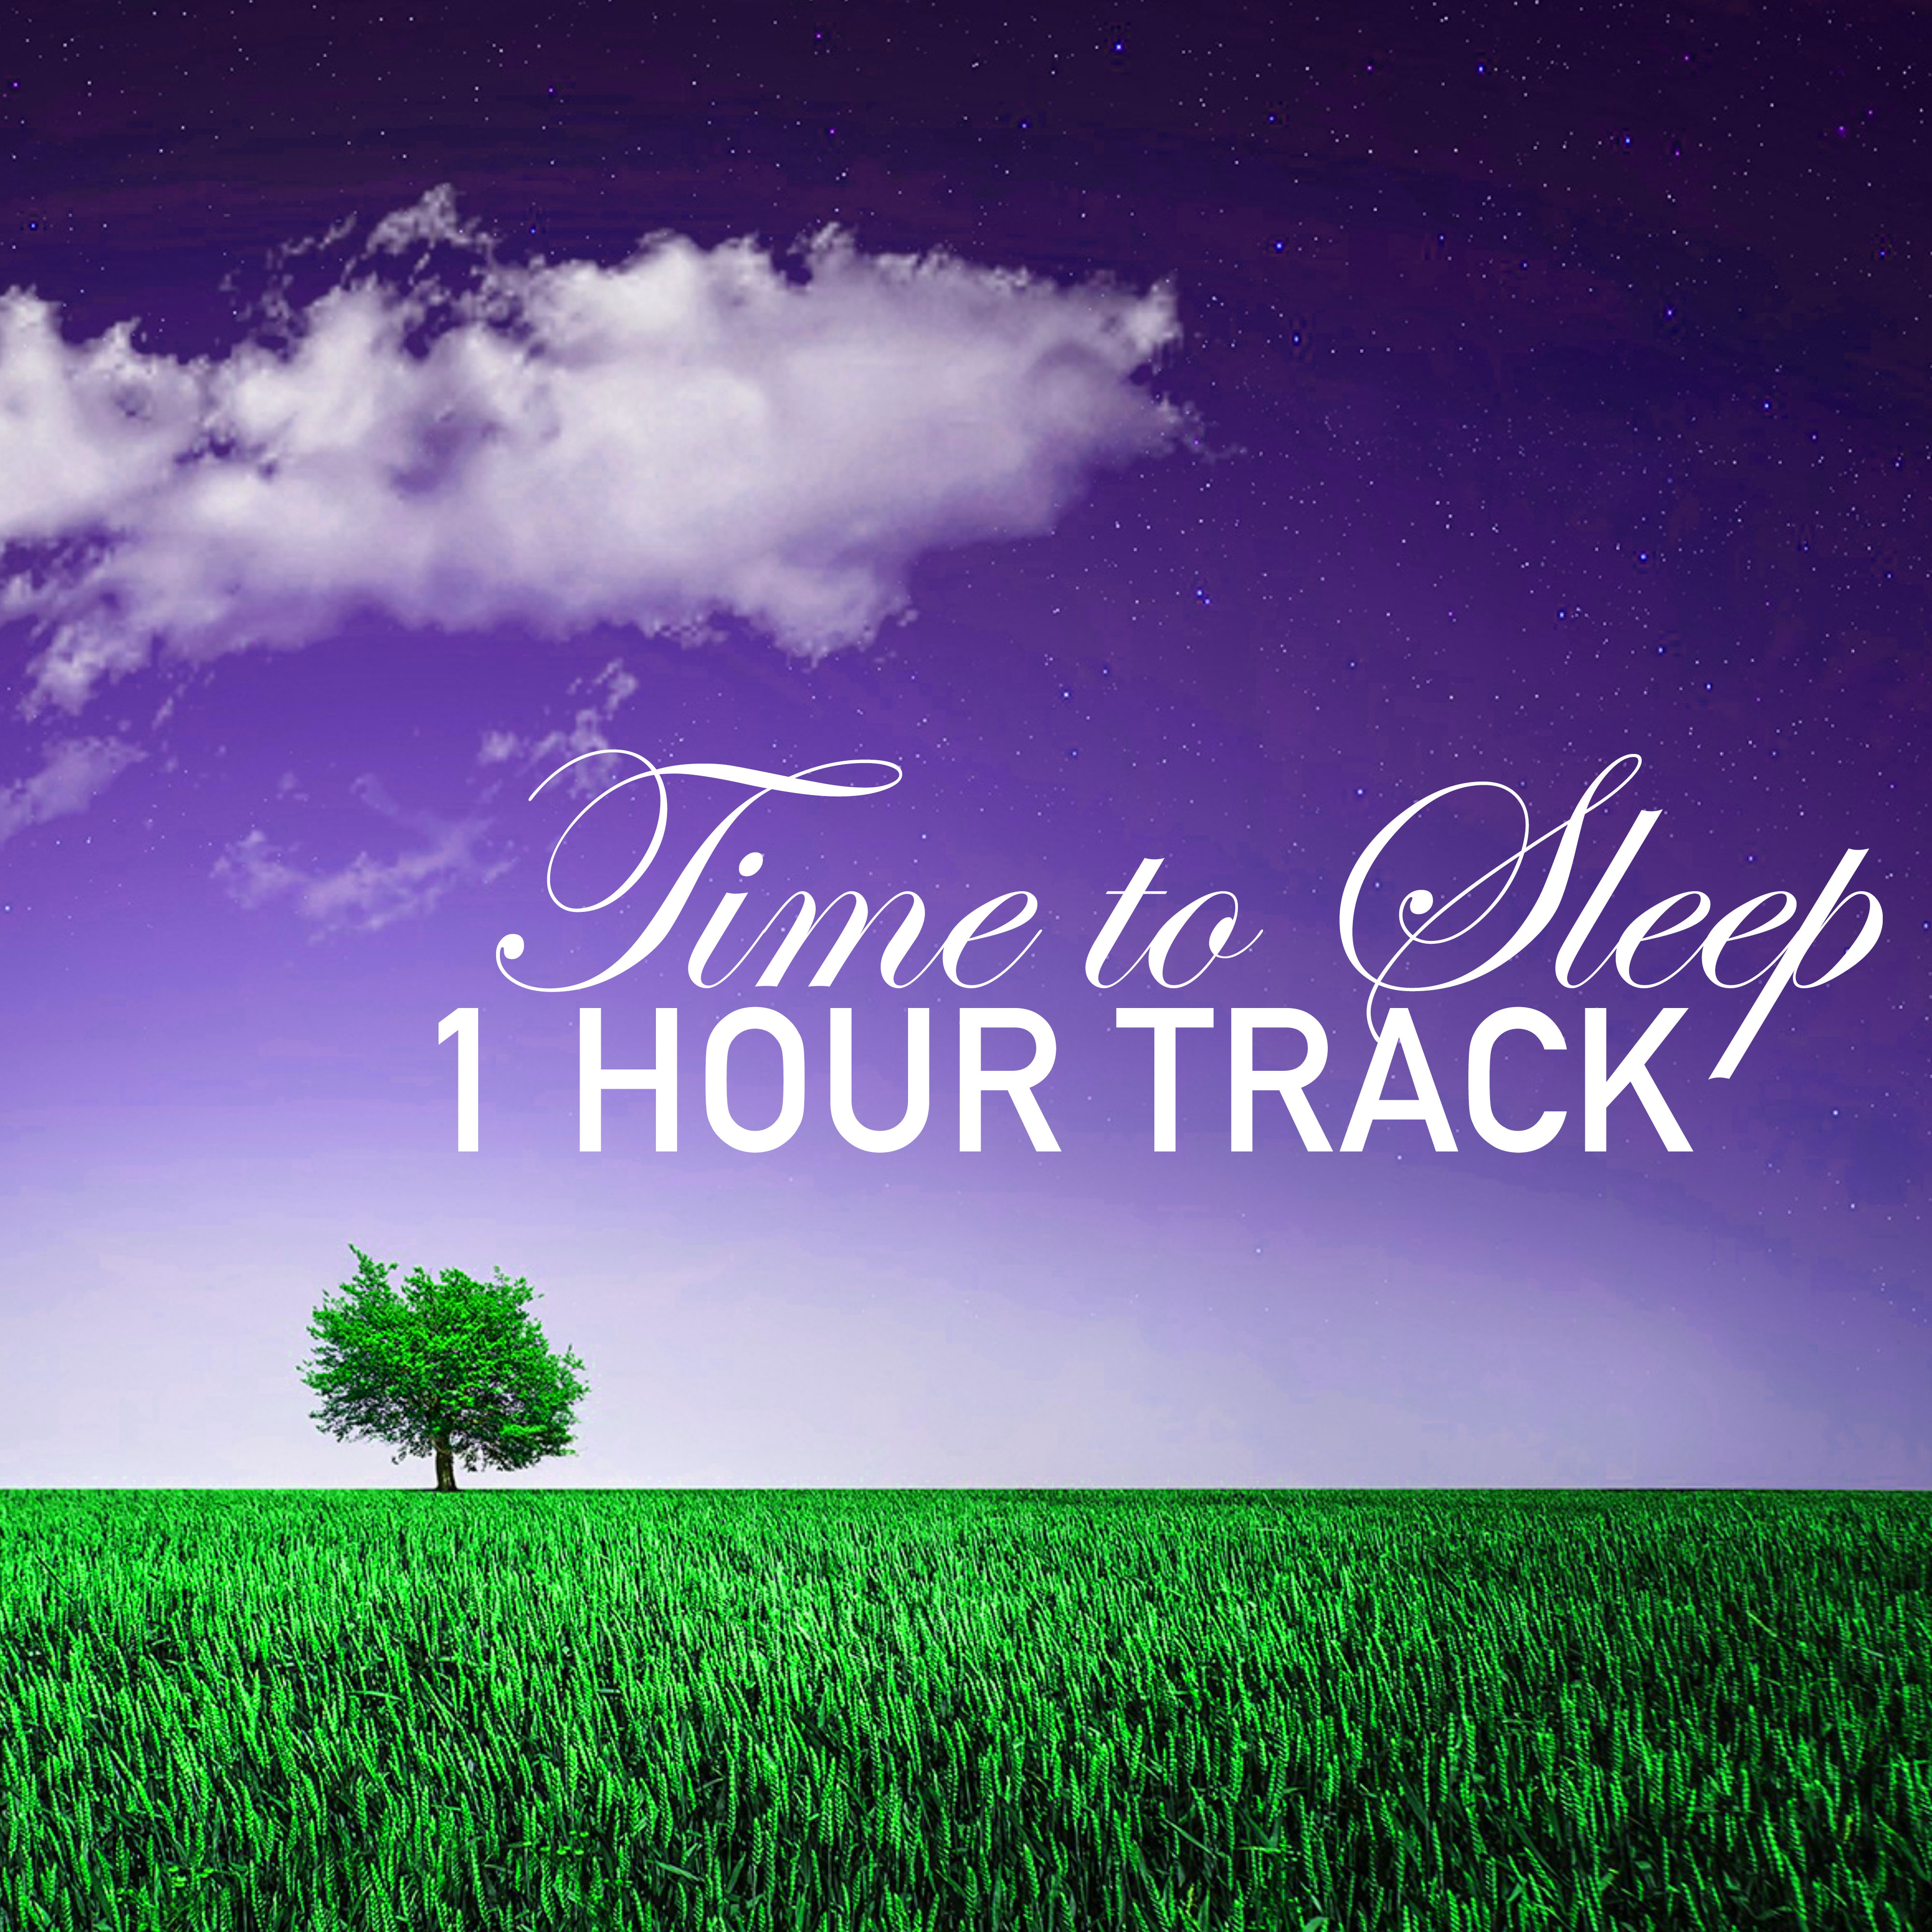 Time to Sleep - 1 Hour Track for Deep Sleeping, Pillow Music to Relax in Bed